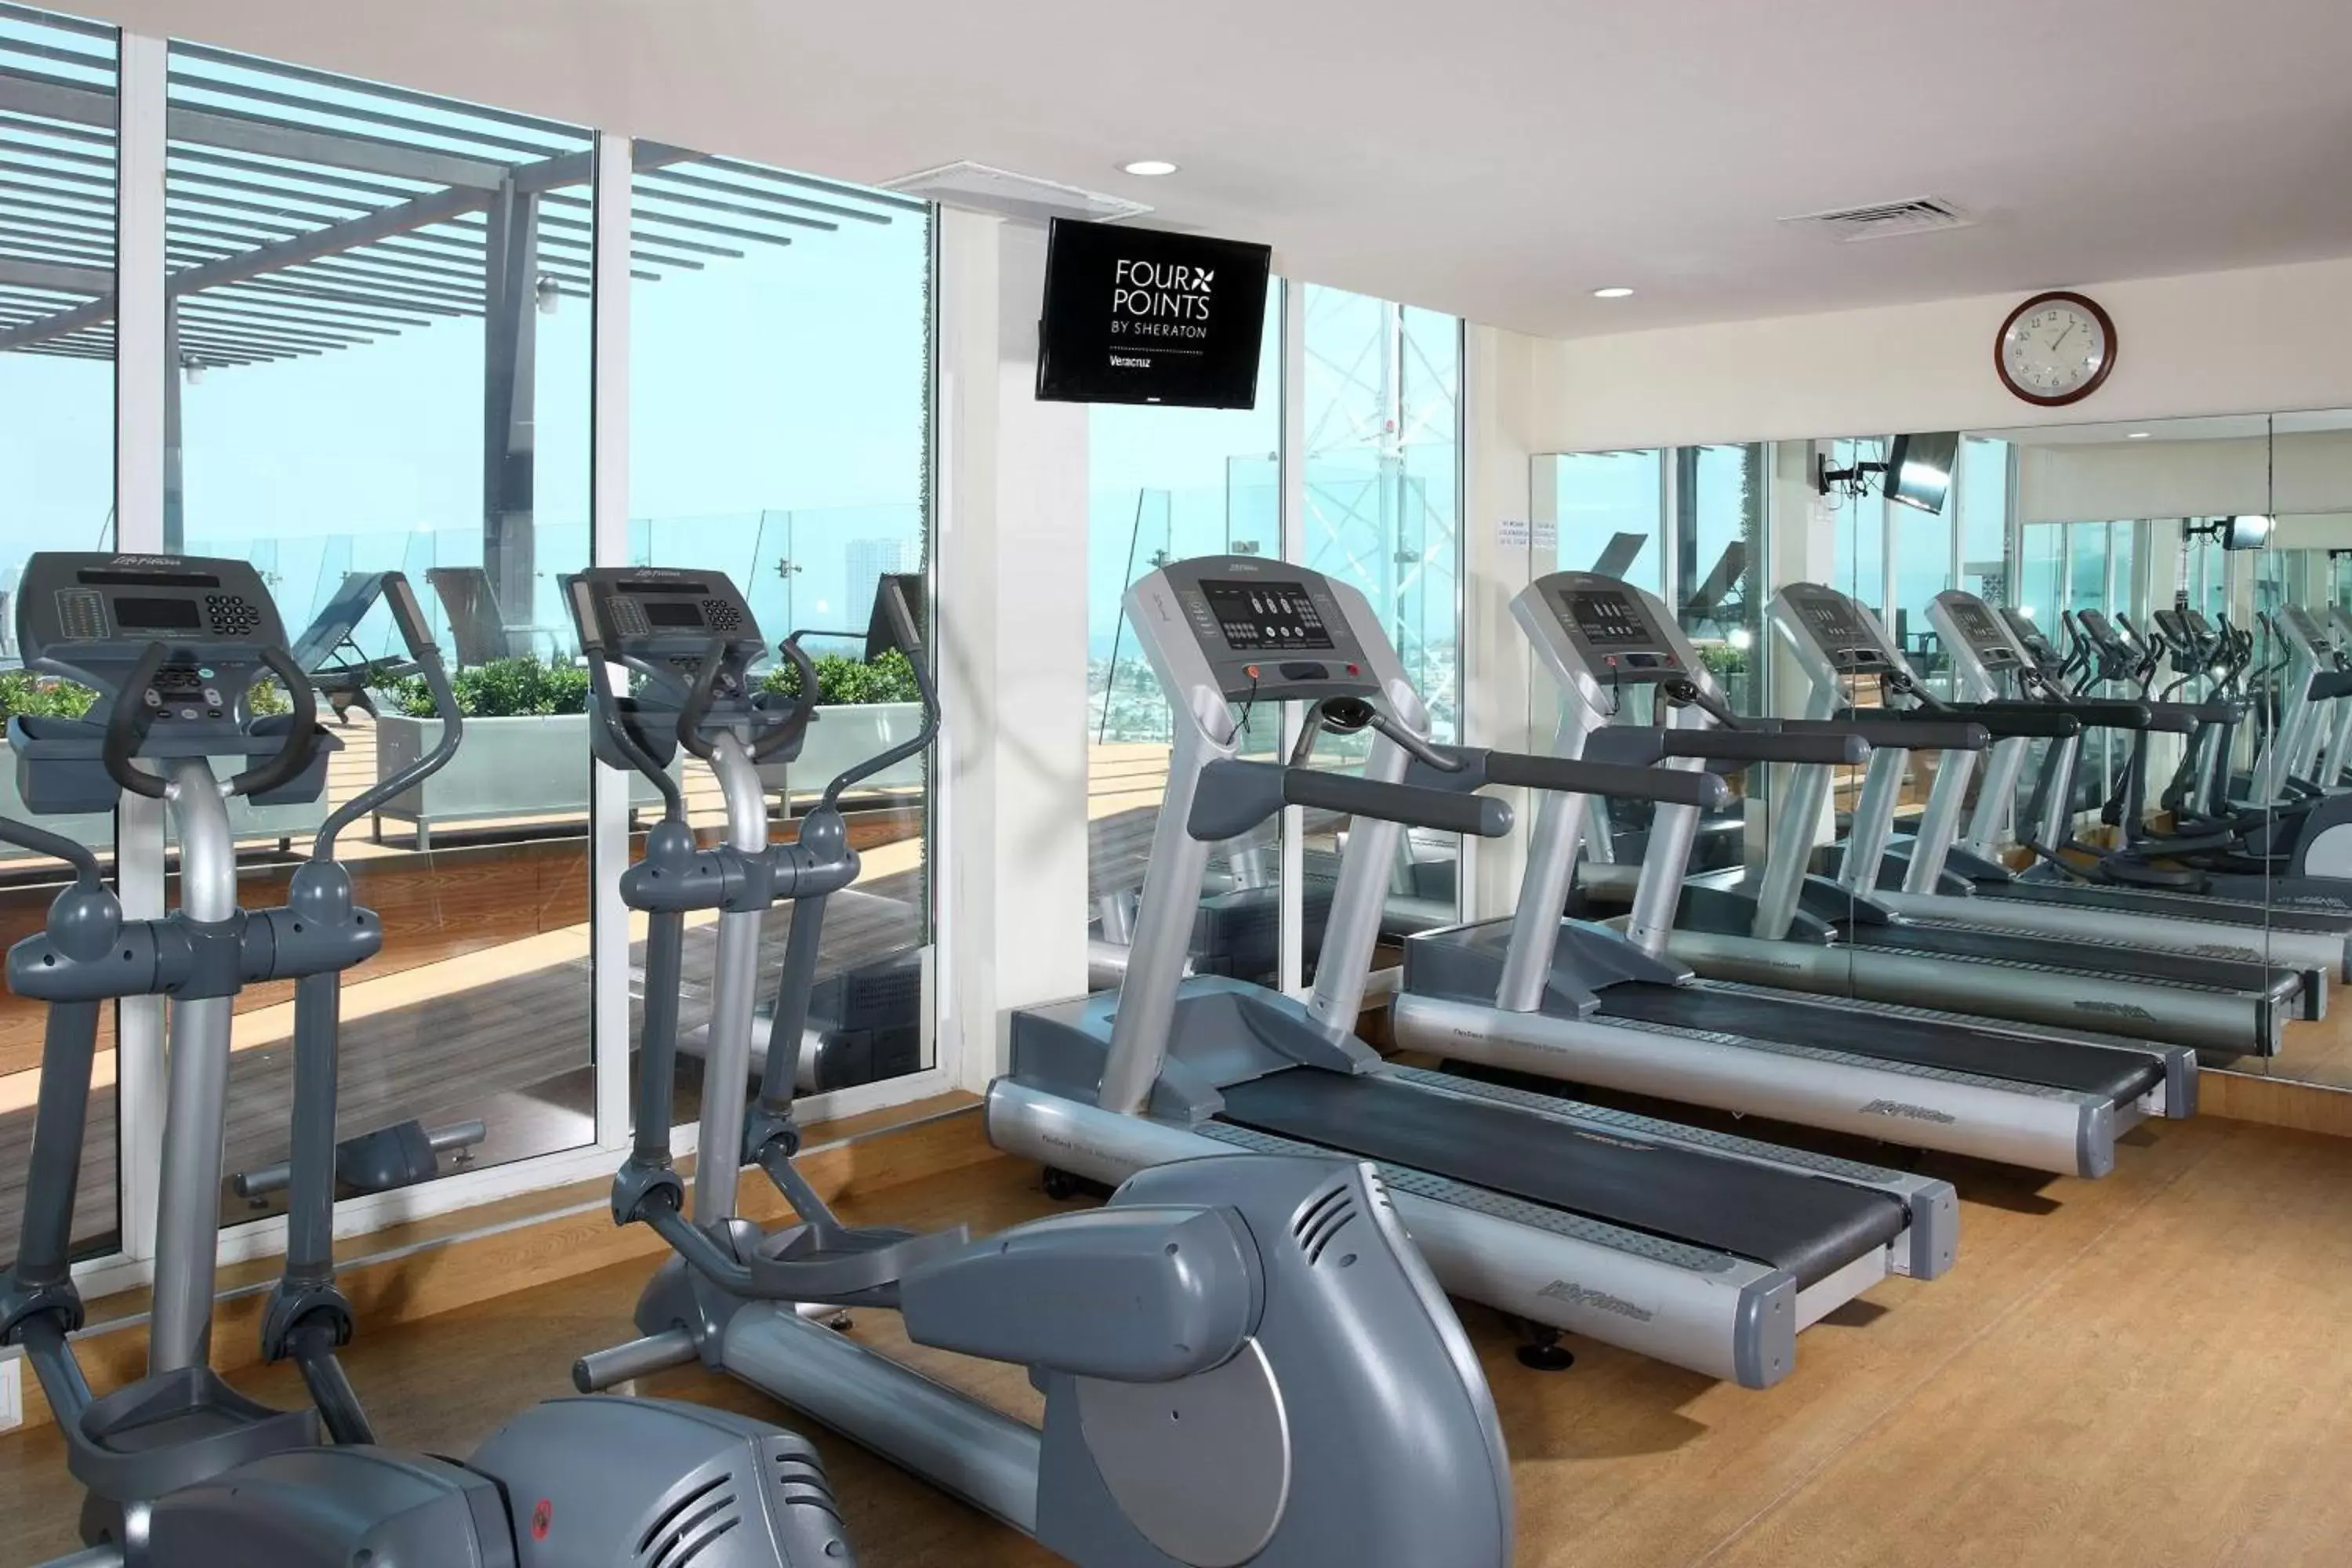 Fitness centre/facilities, Fitness Center/Facilities in Four Points by Sheraton Veracruz